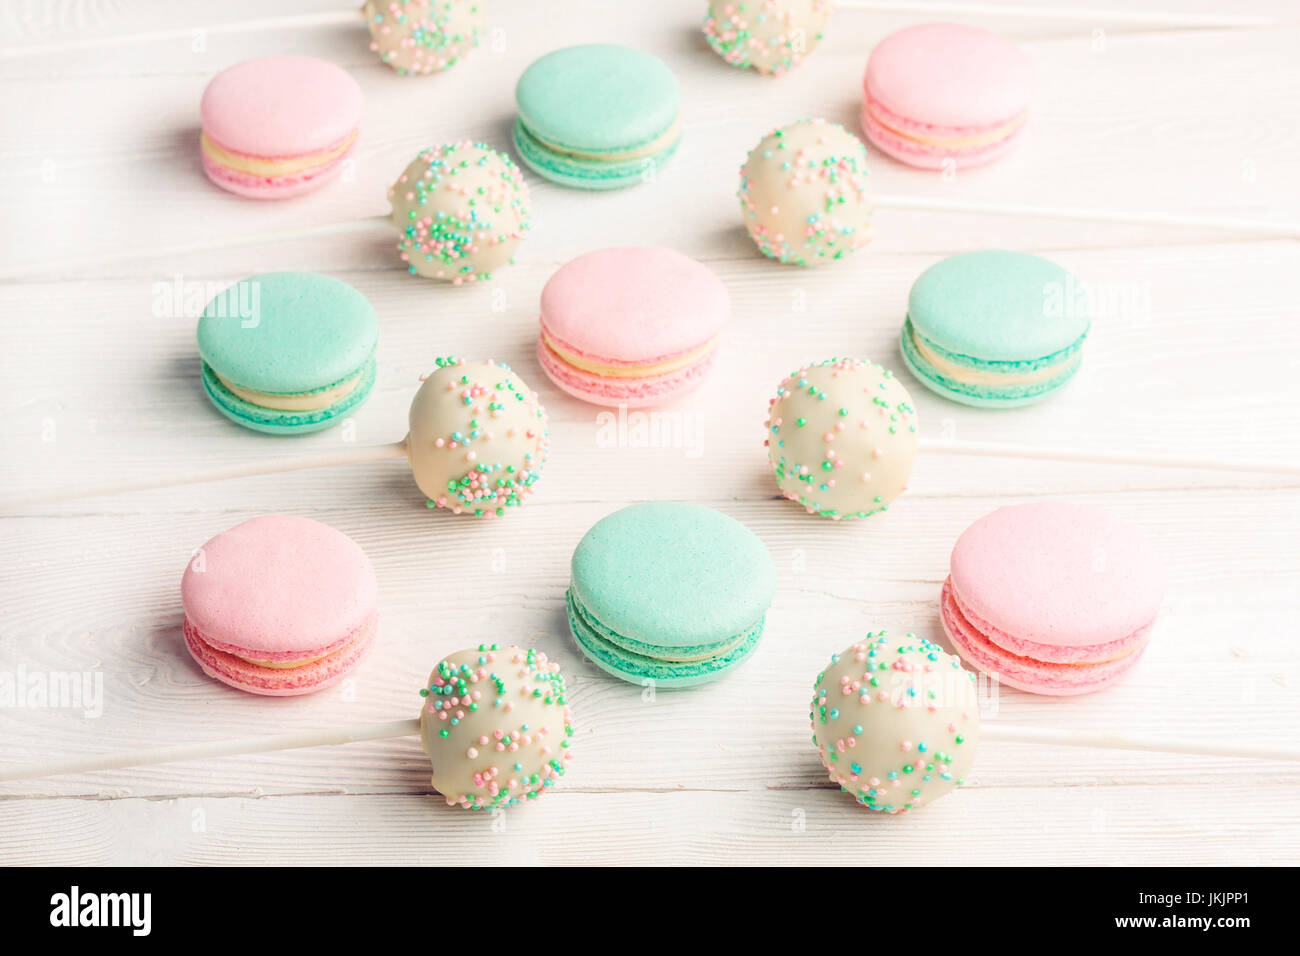 Collection of colorful macaroons with cake pops Stock Photo